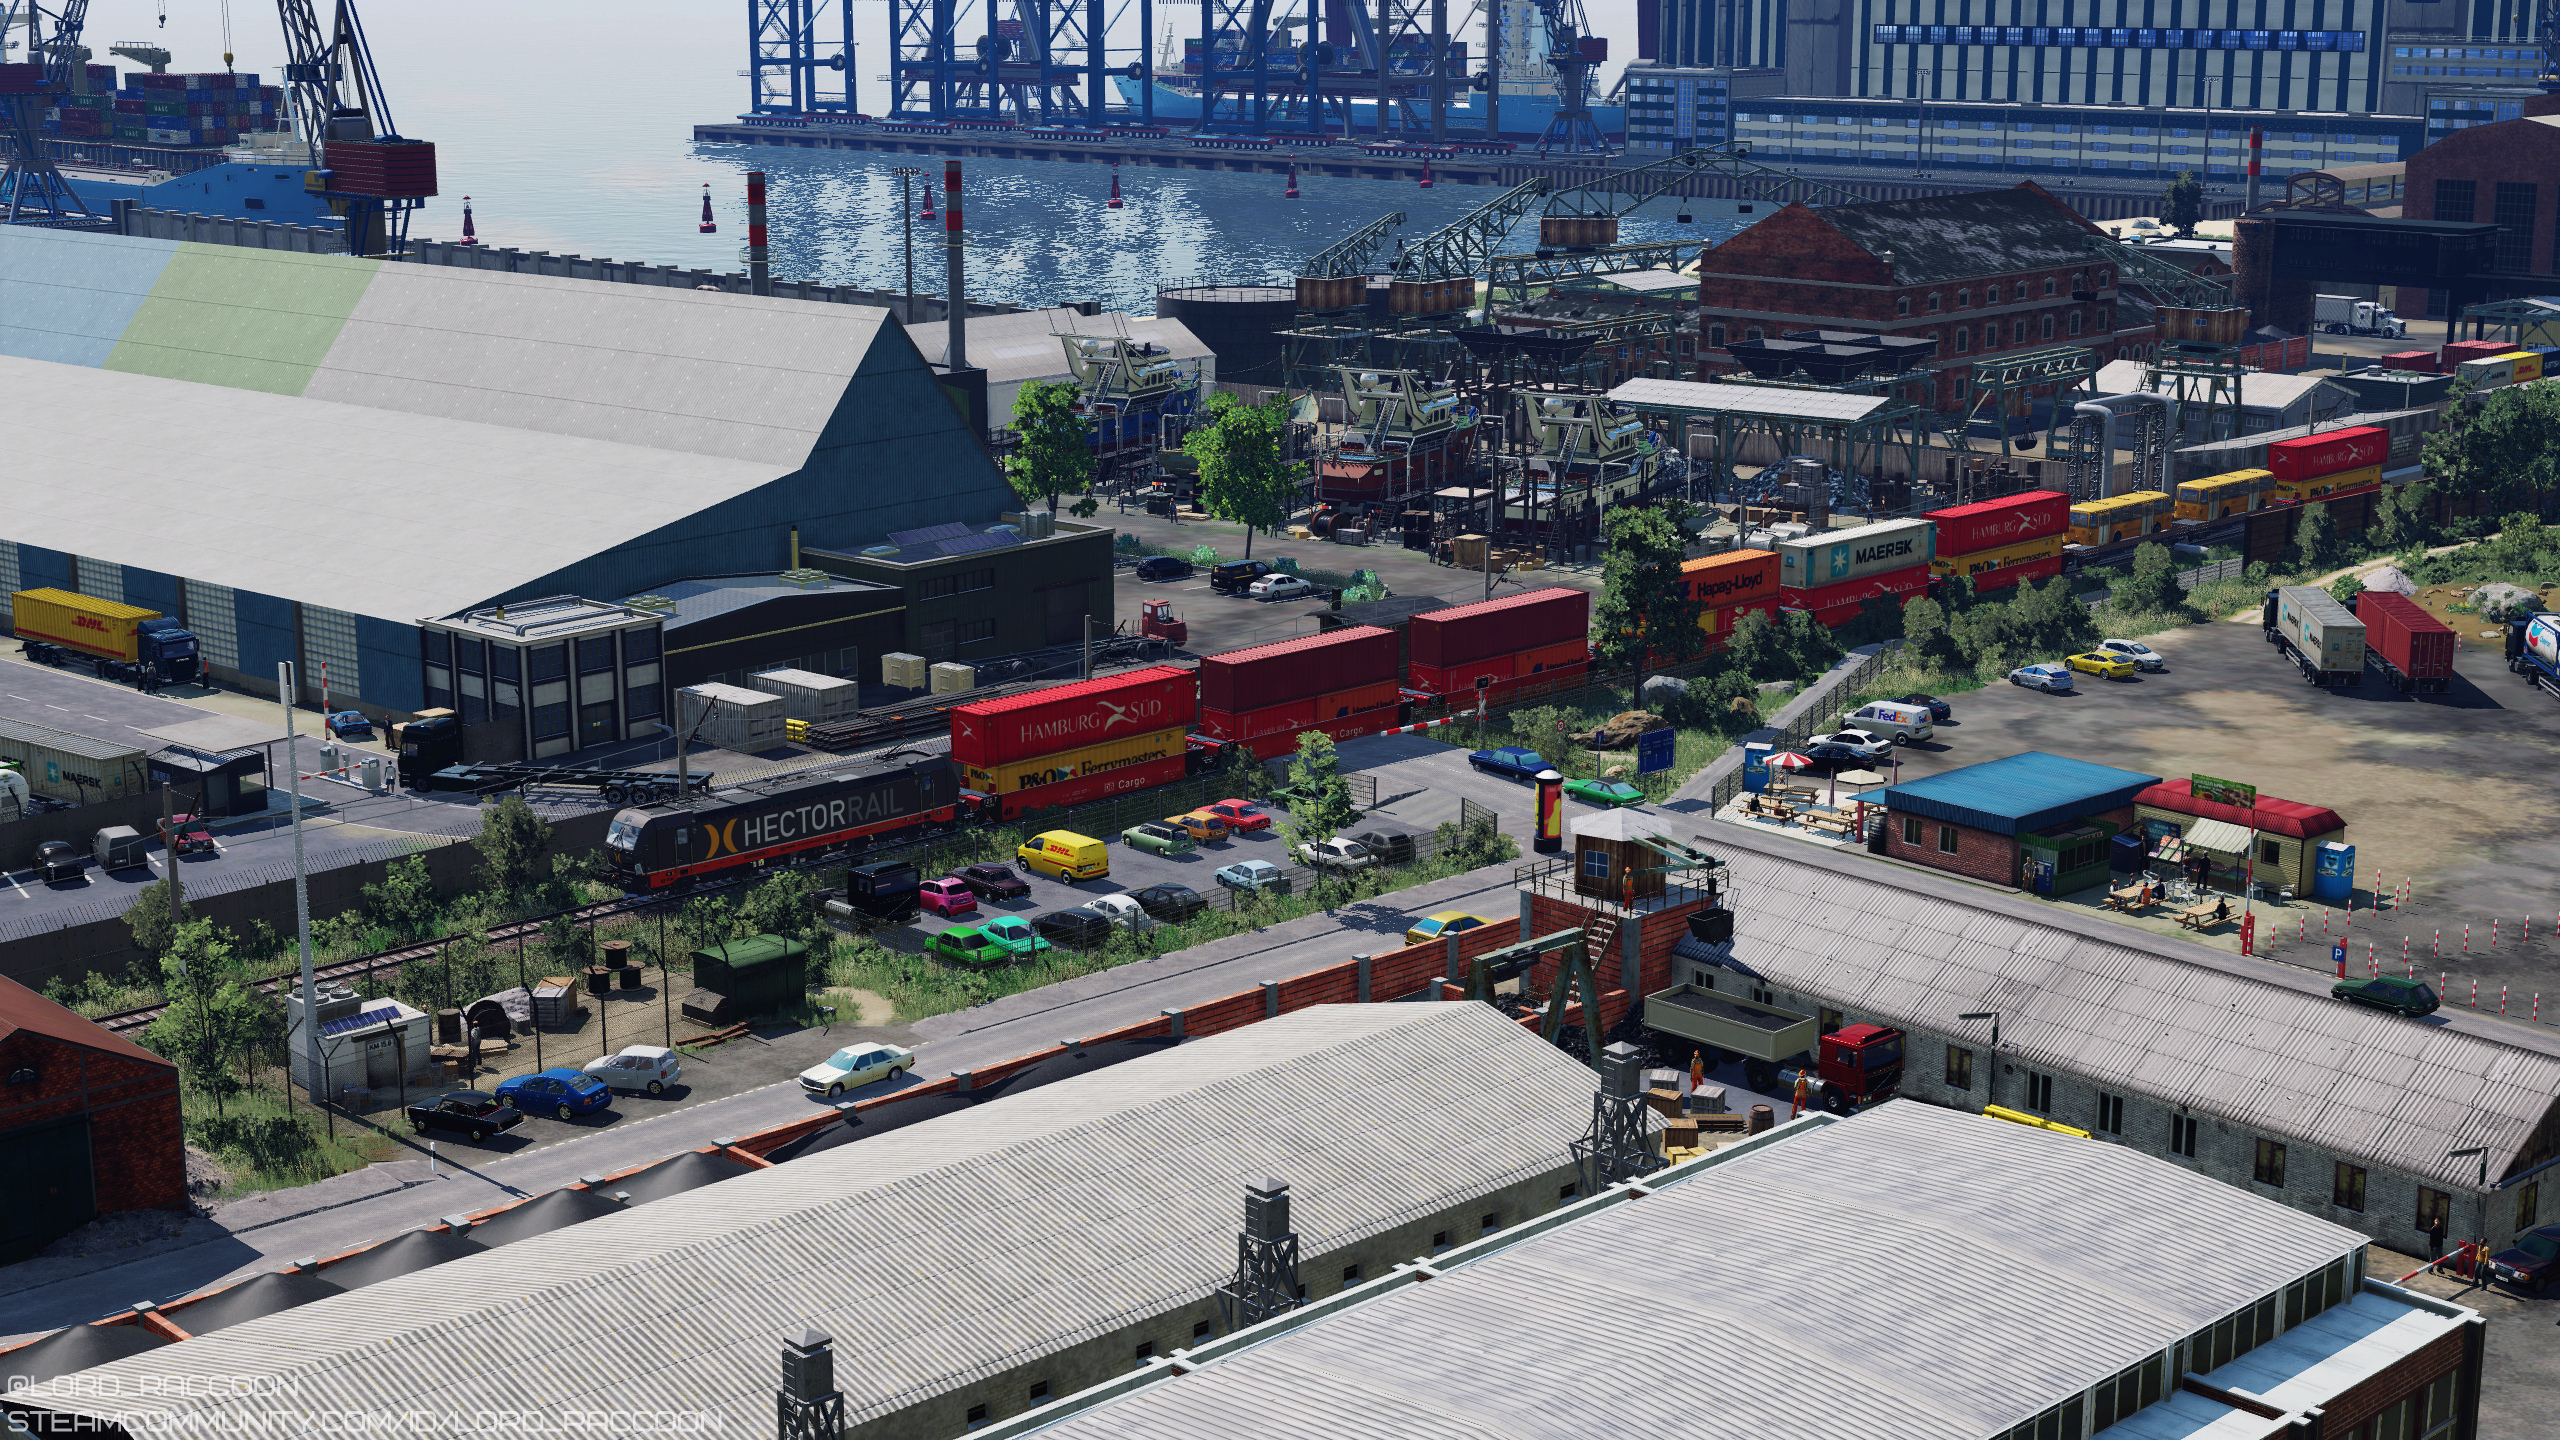 [TpF1] Busy day at Gdansk seaport